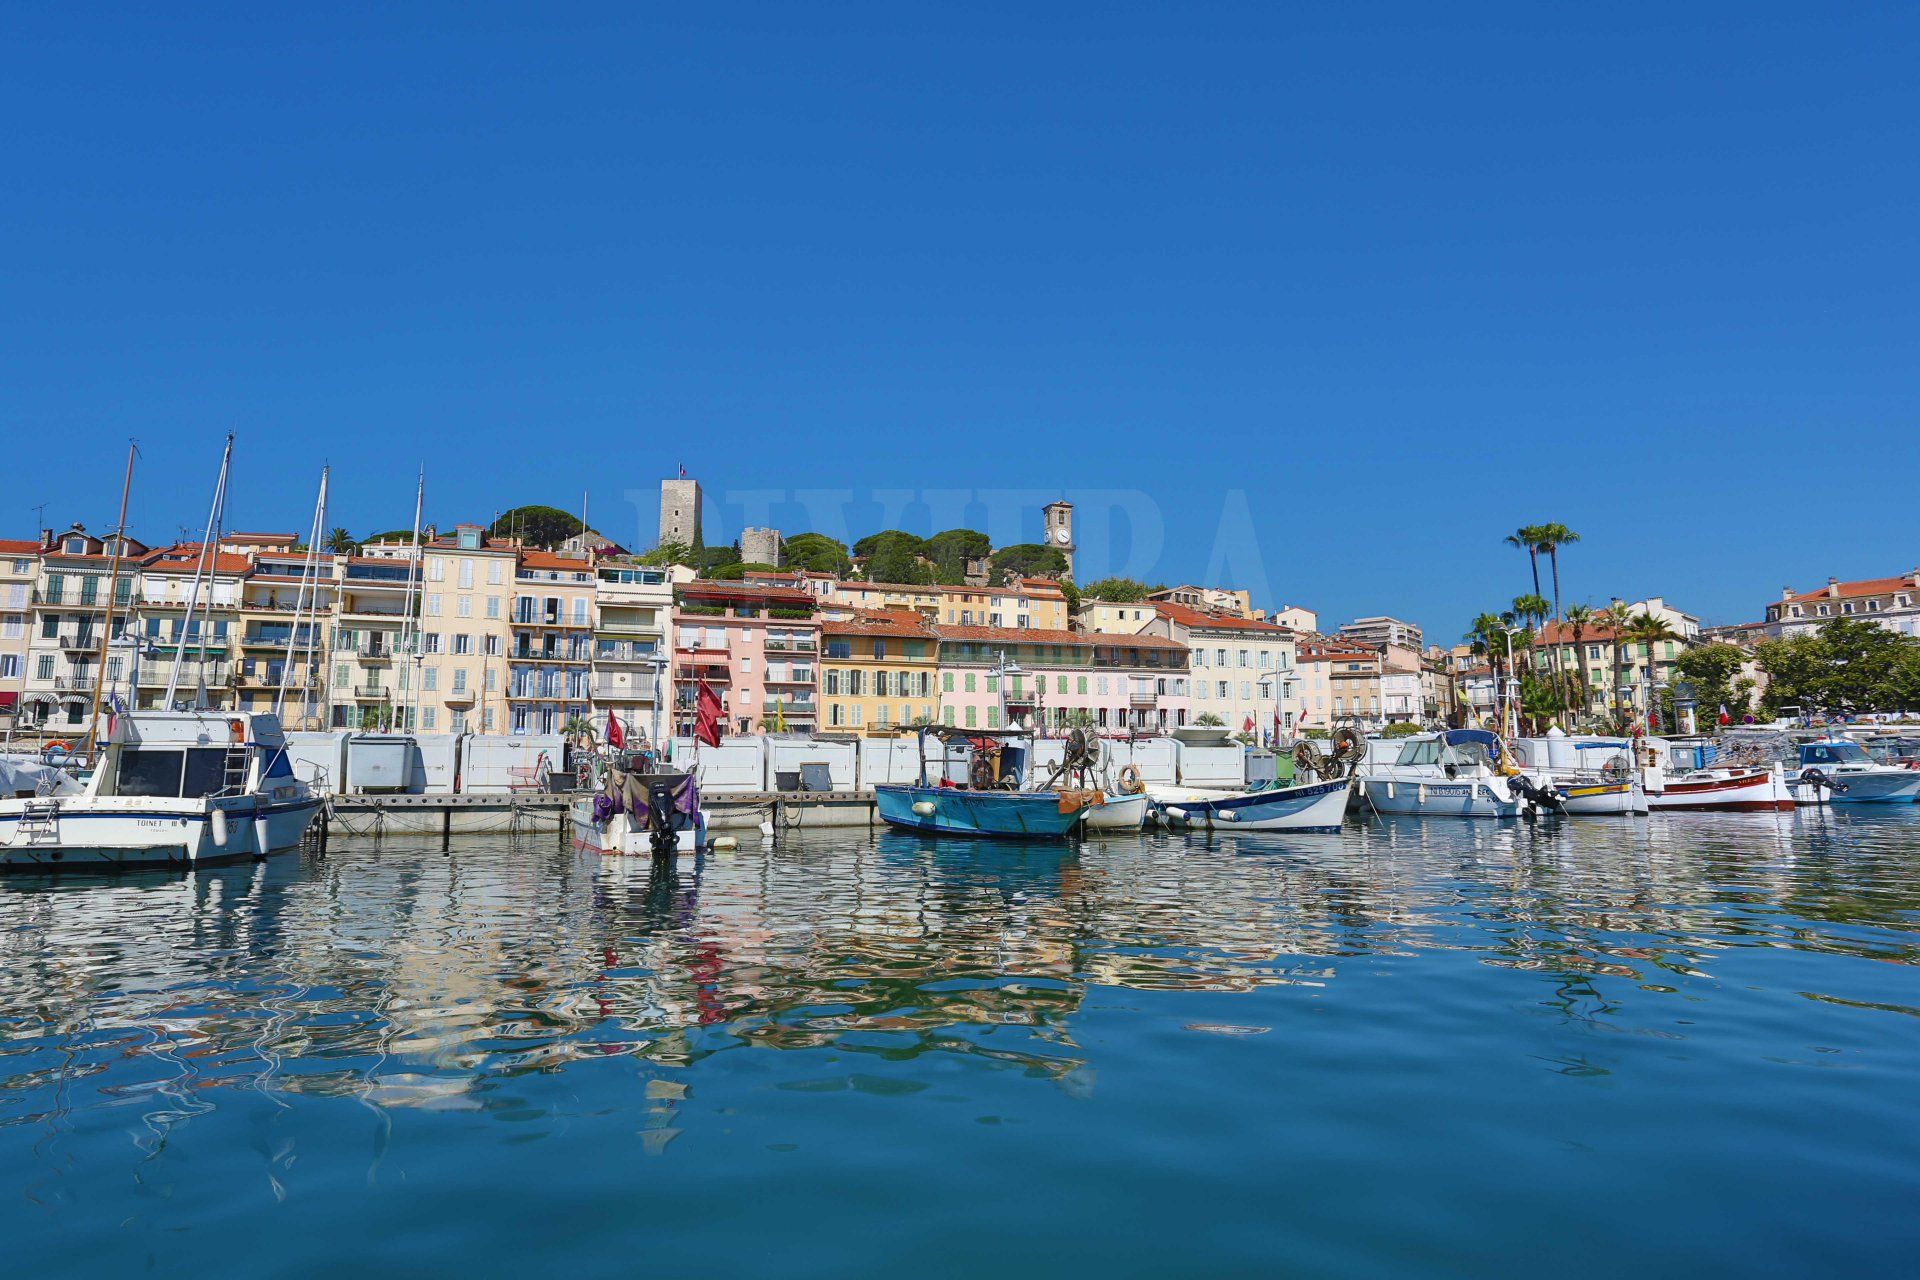 You are currently viewing Airbnb: with 7 active ads, Cannes is the 418th largest French city on the platform